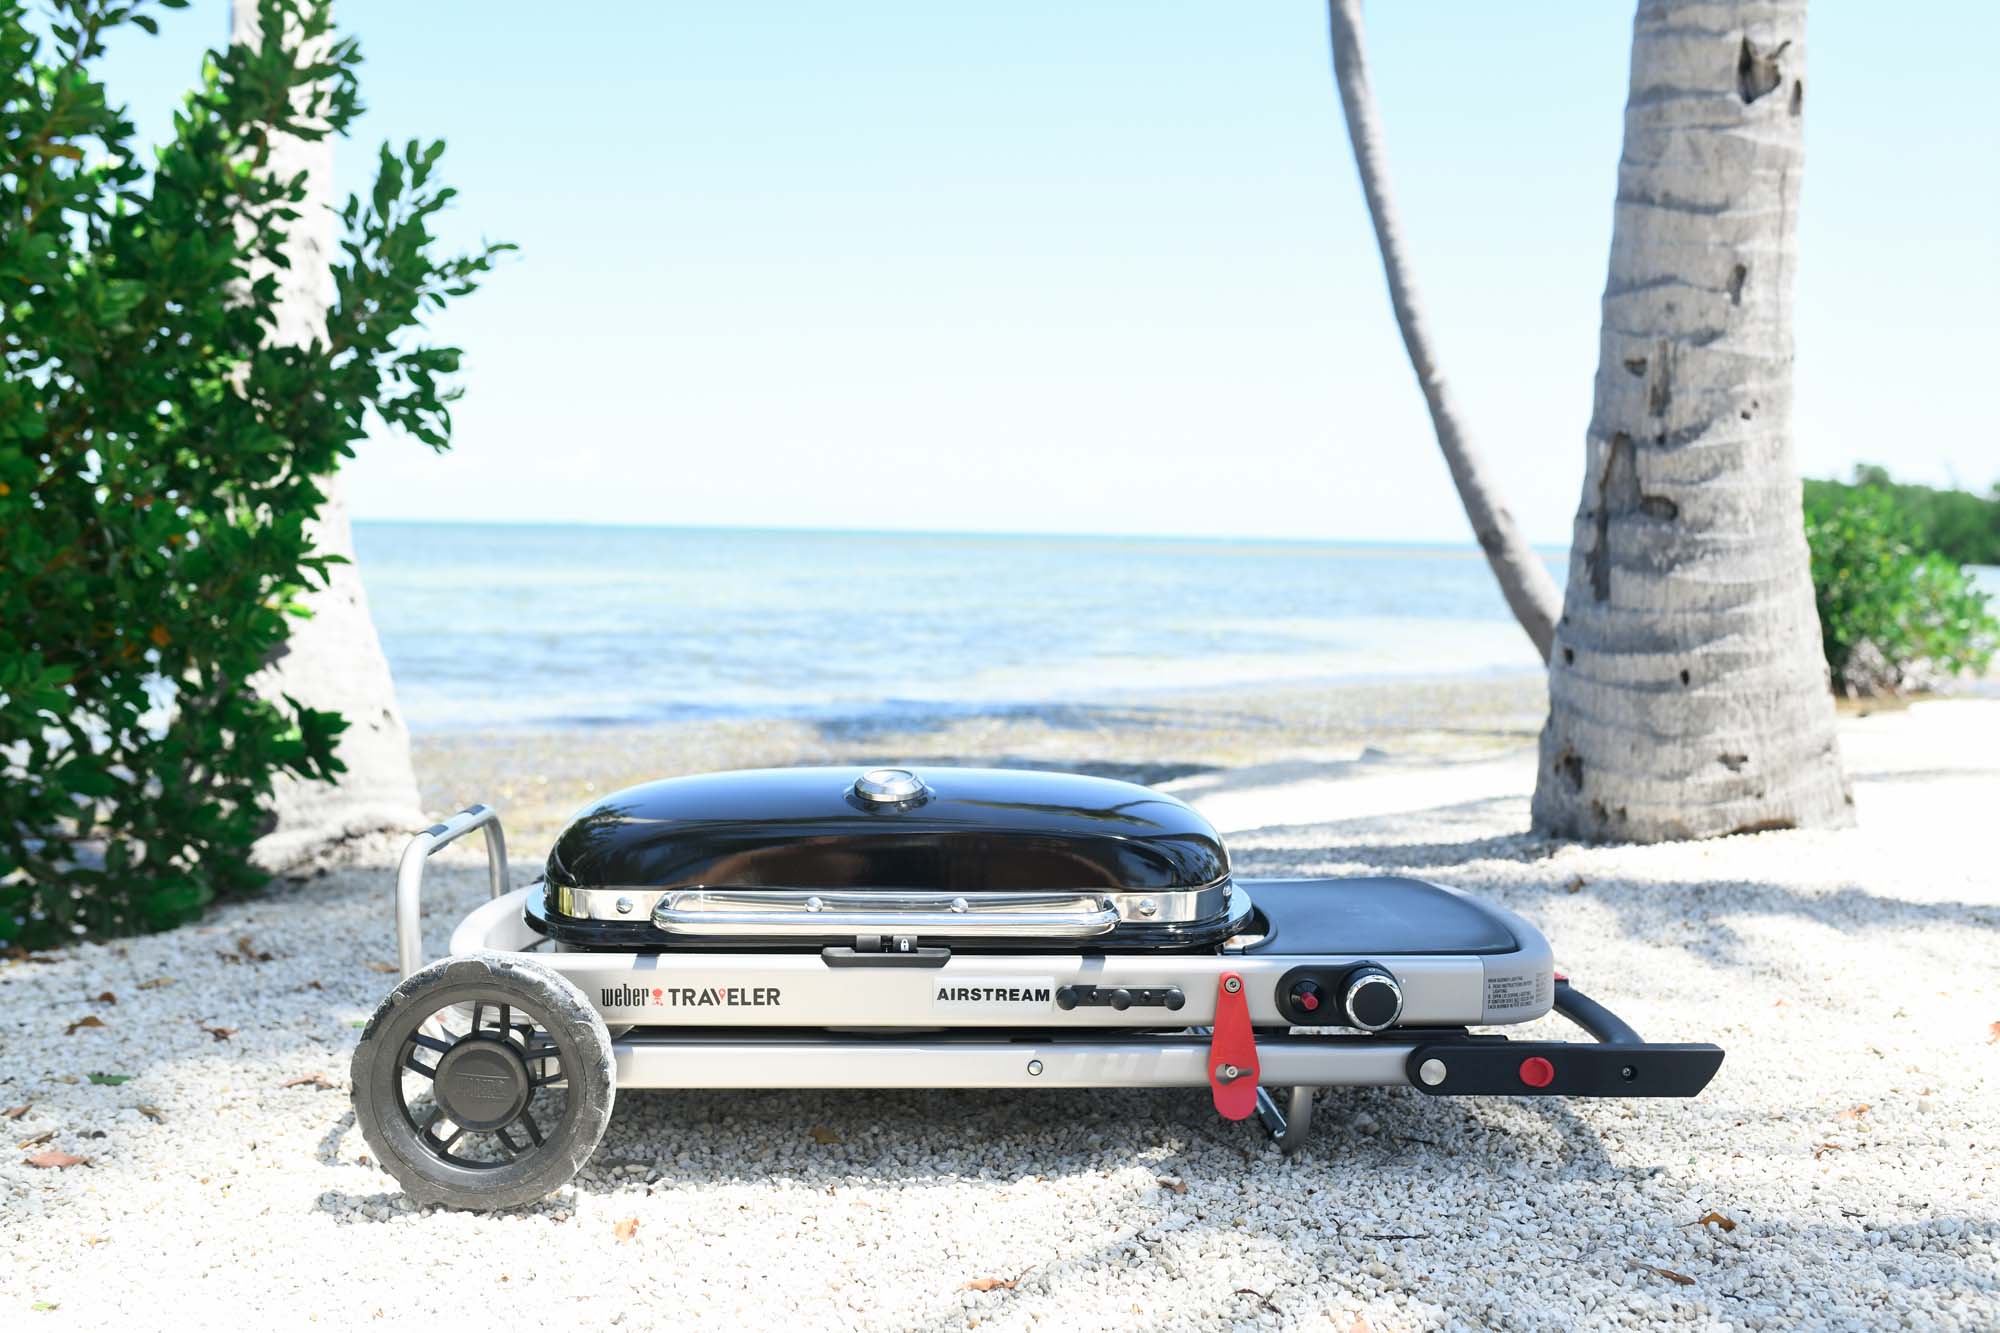 The Campfire Cooking Equipment of Your Dreams - Embracing the Wind